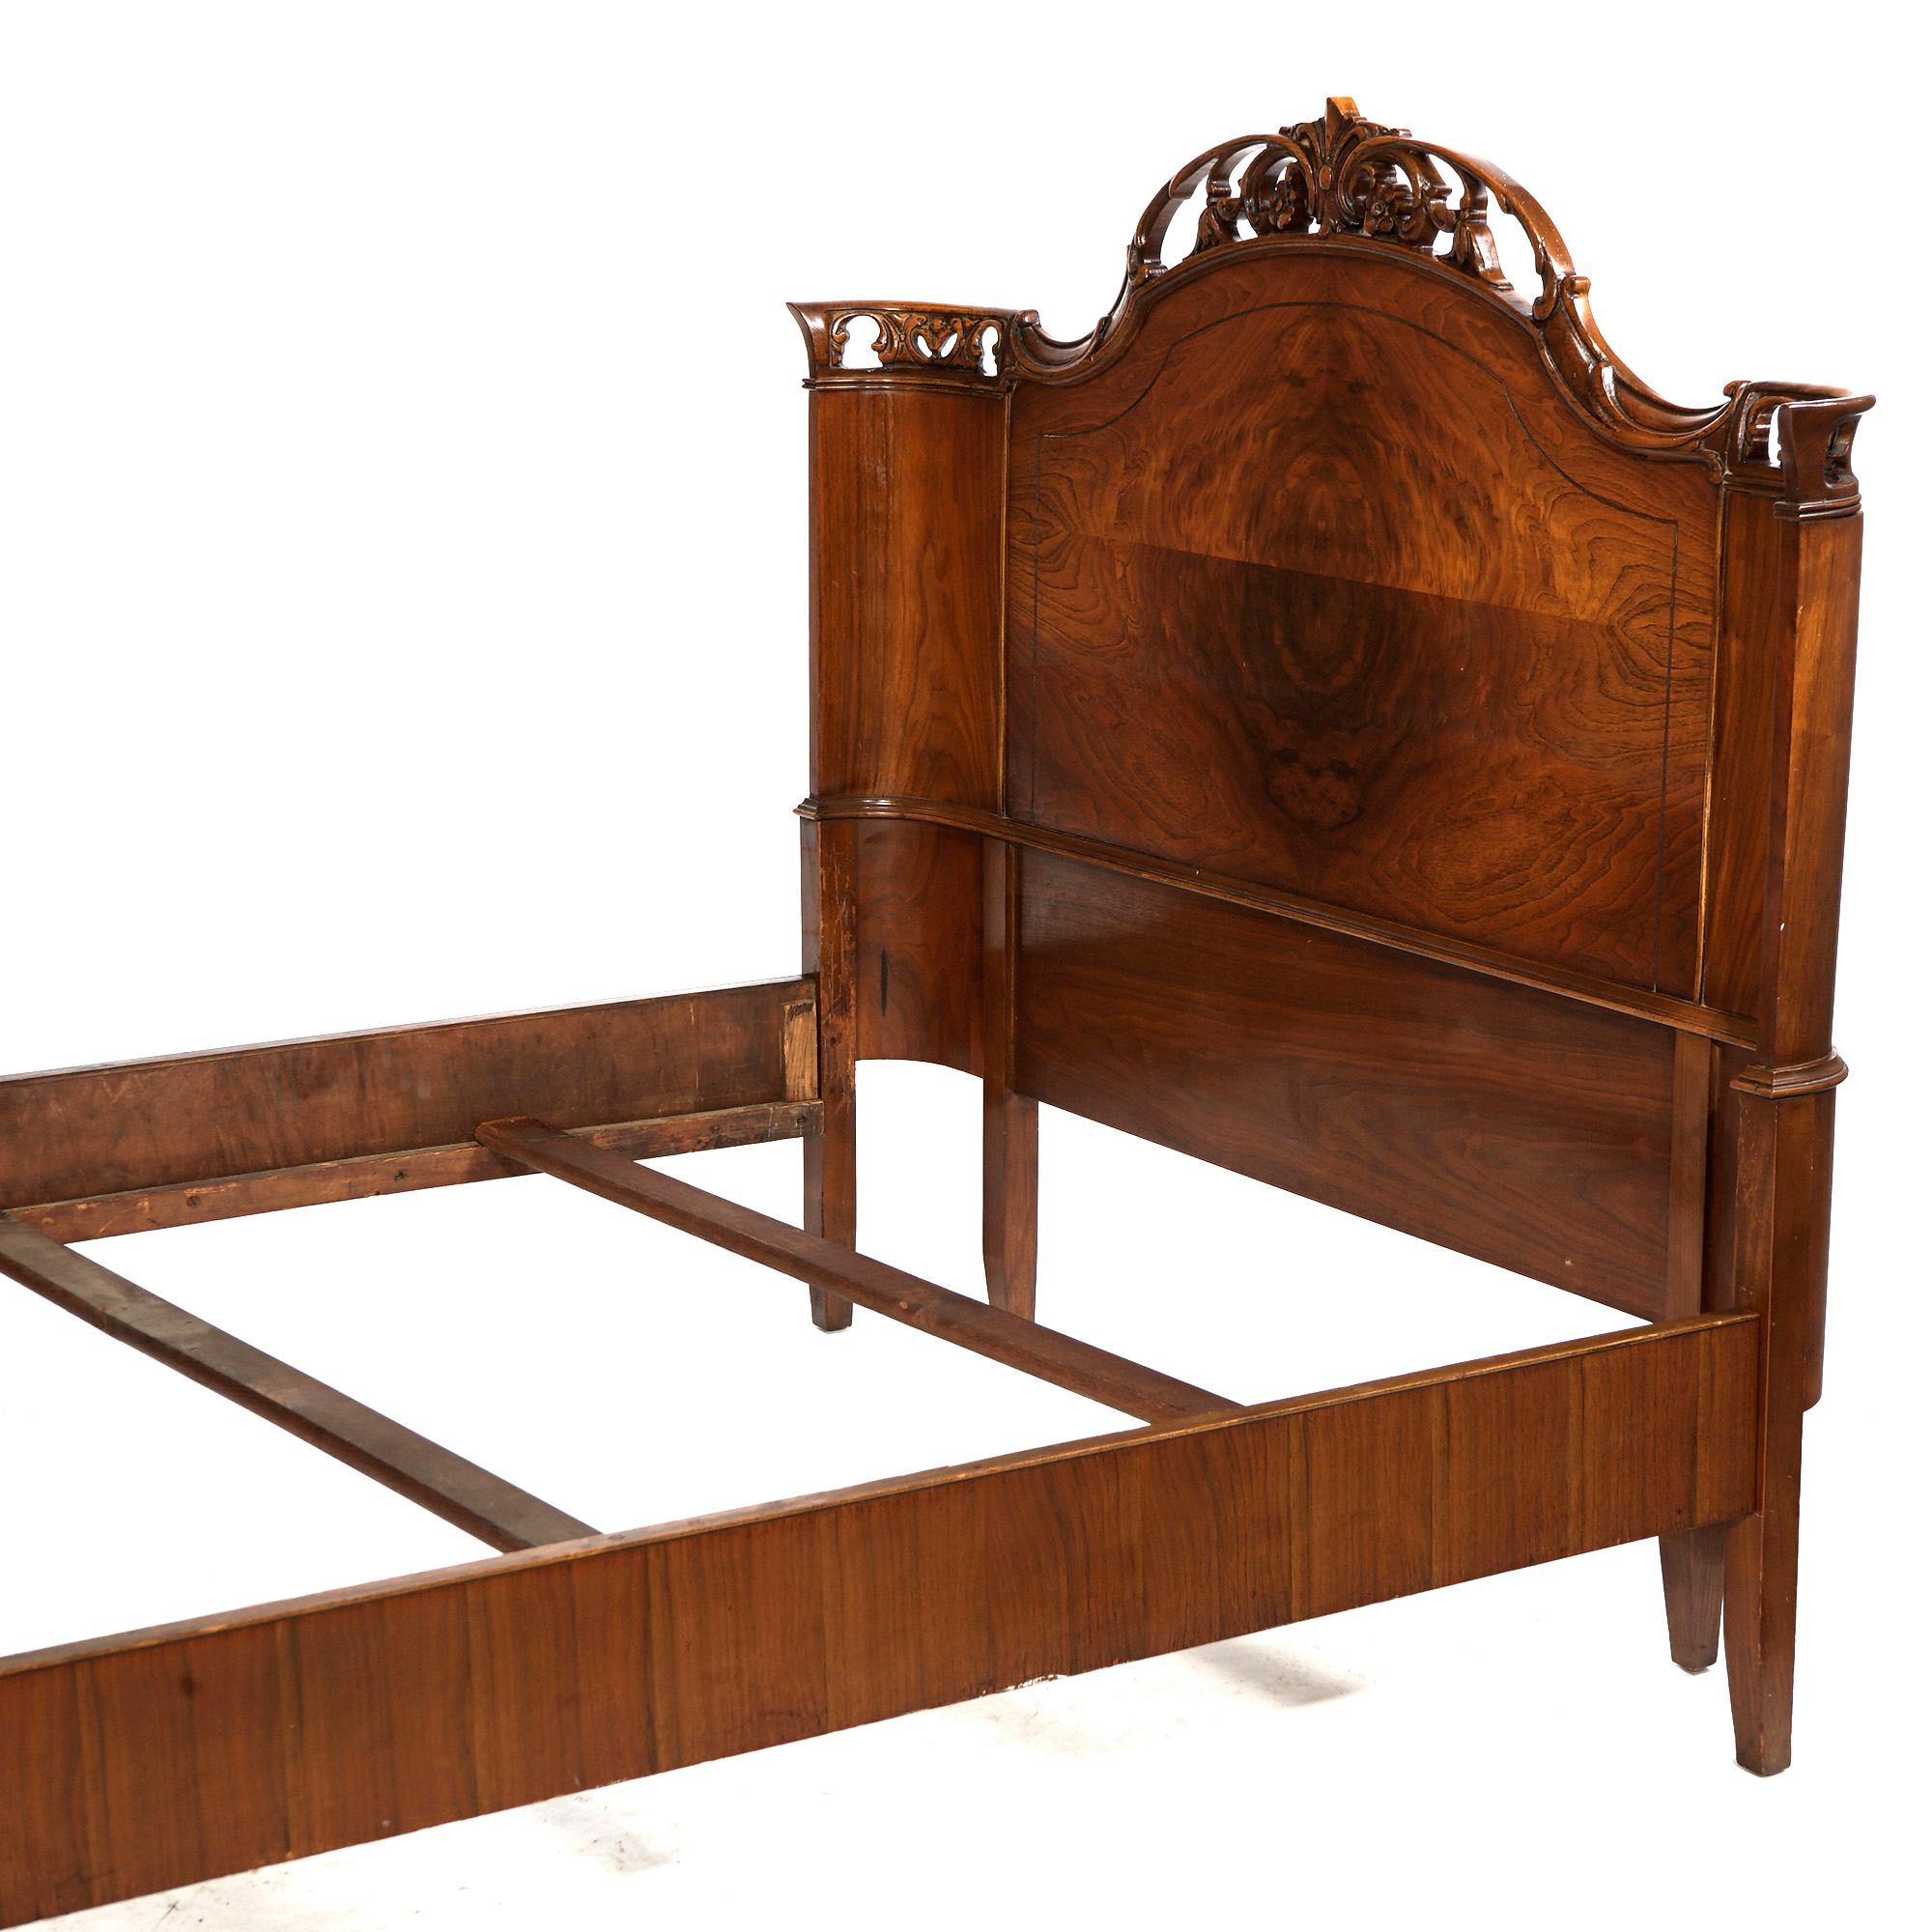 An antique French double bed in the manner of Louis XV offers flame mahogany construction with curved headboard and footboard having pierced foliate carved crests and raised on acanthus carved legs, c1930

Measures- exterior 50''H x 58.5''W x